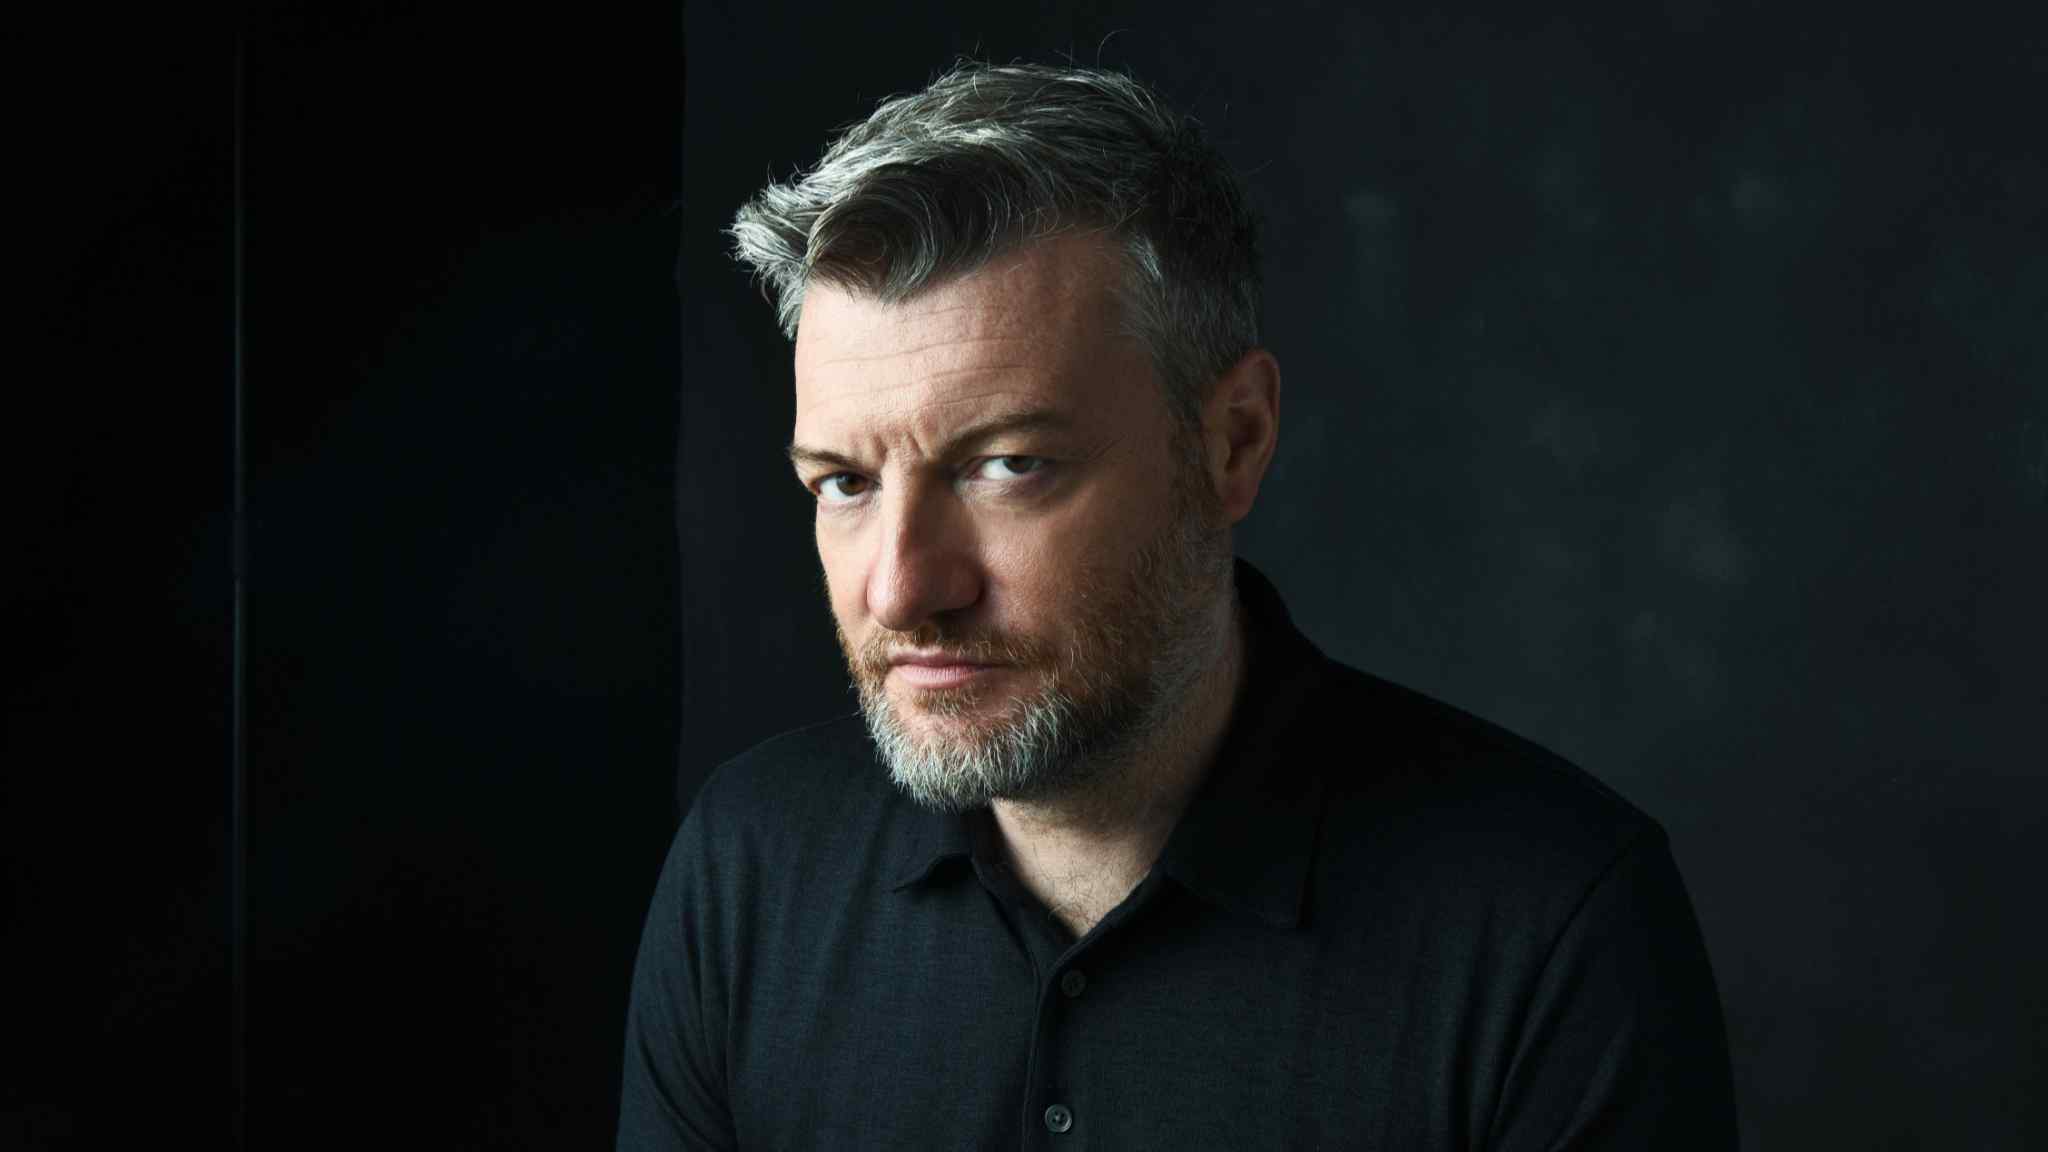 Charlie Brooker on satirising TV in Black Mirror: ‘If it wasn’t on Netflix, we’d be sued’